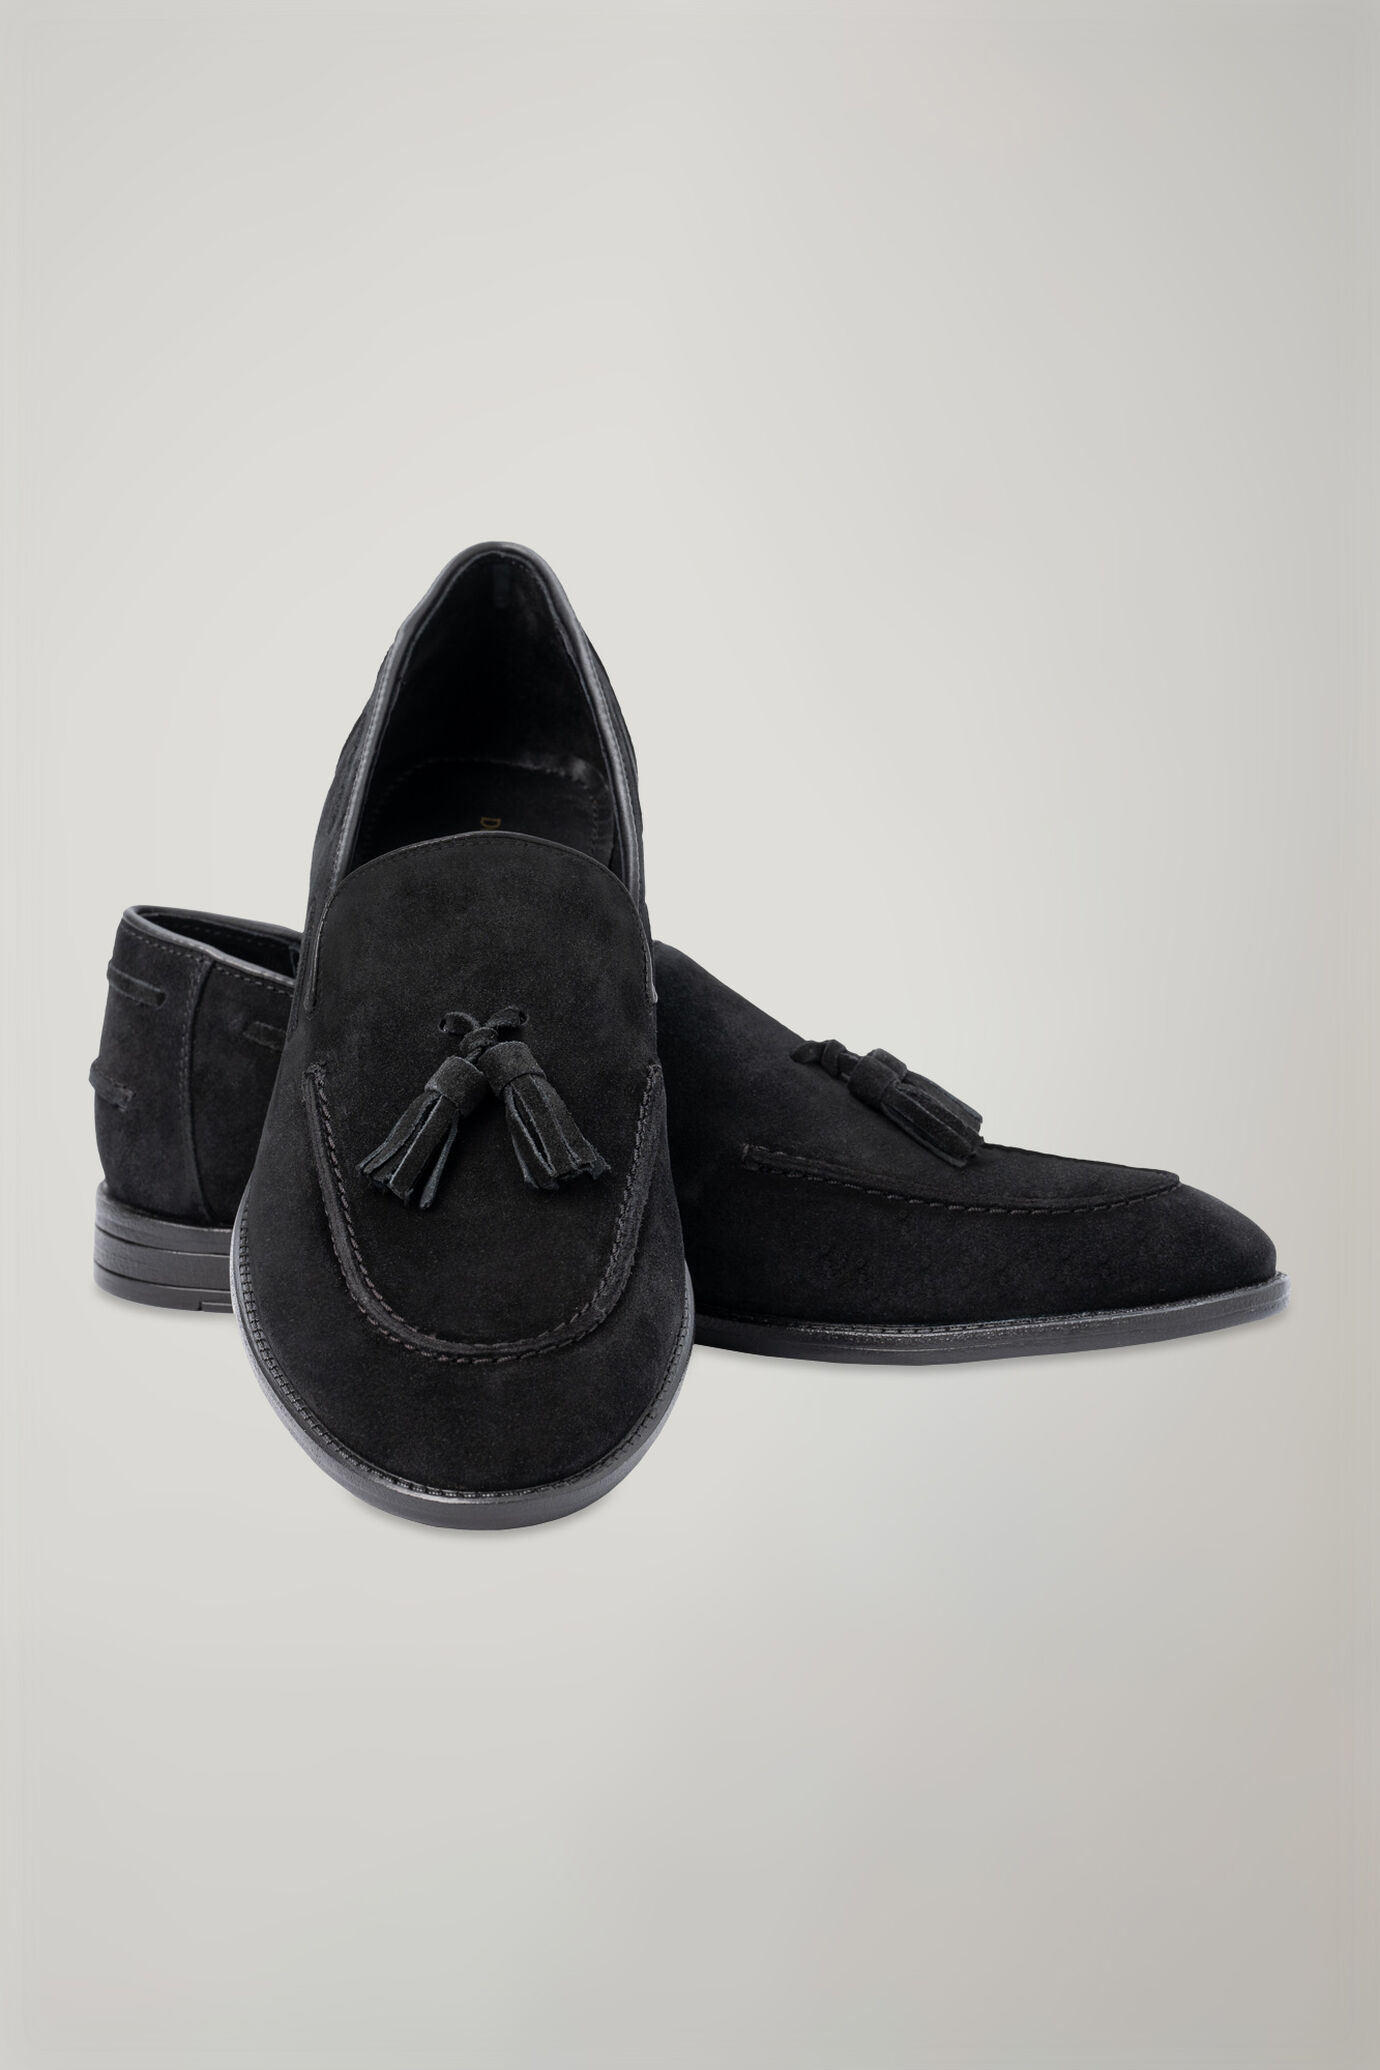 Men's moccasin in genuine suede leather